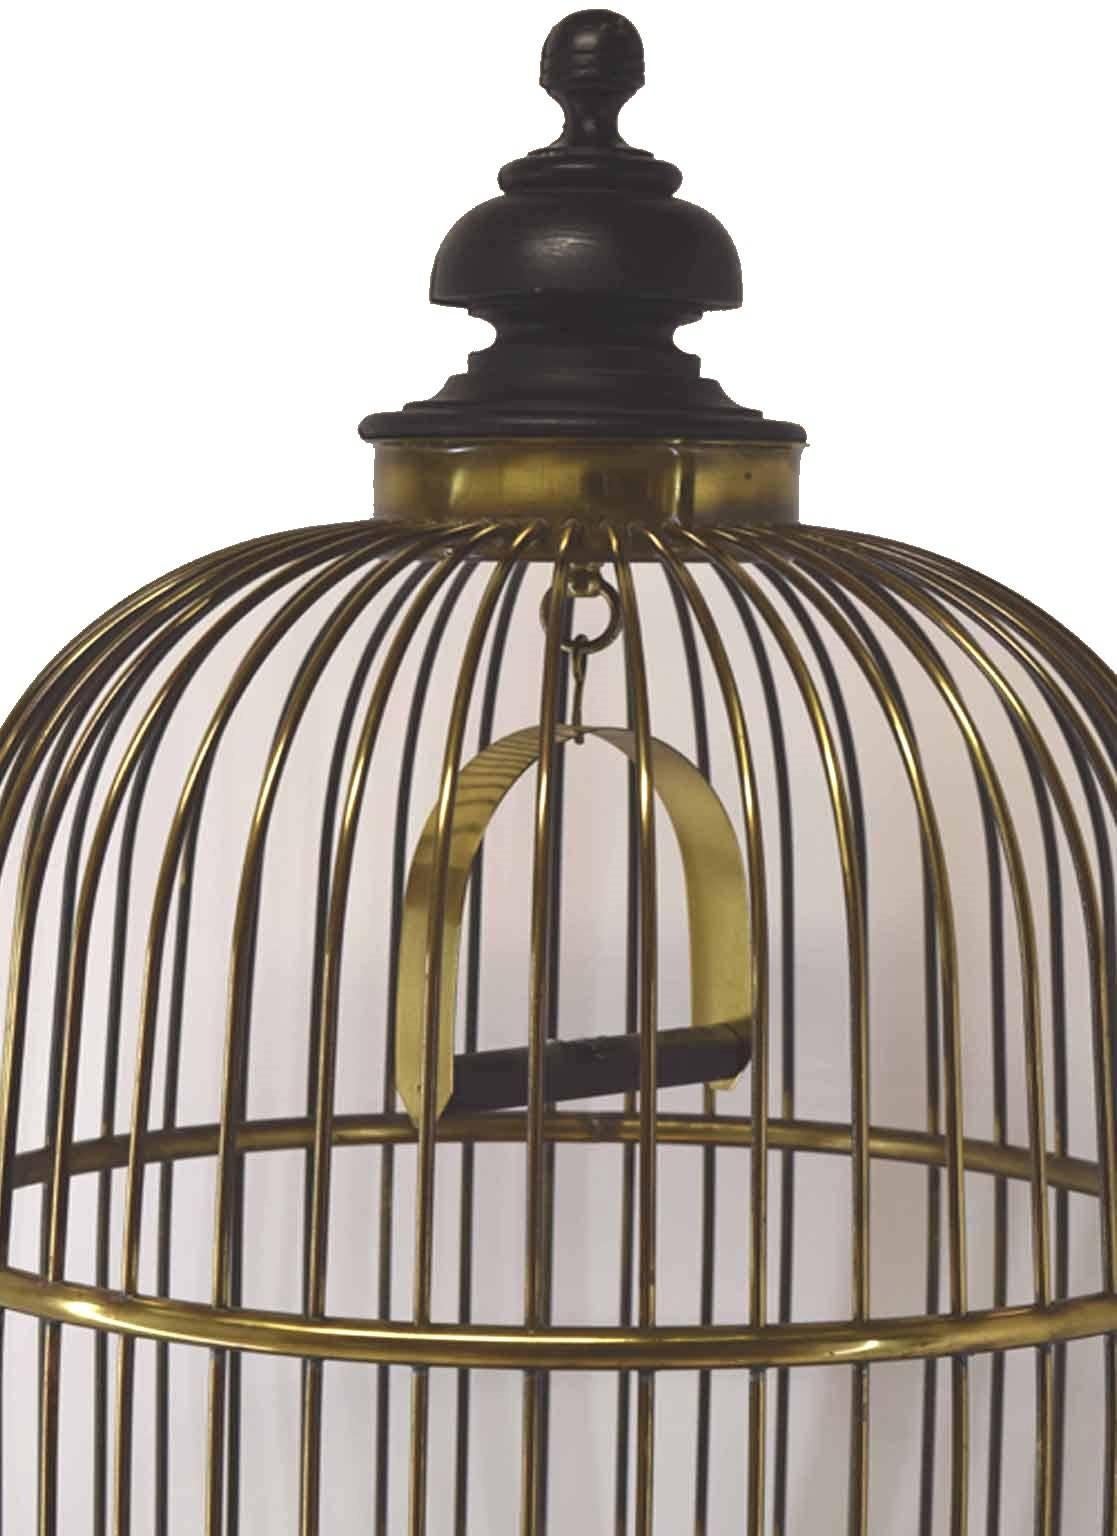 Antique brass and wire ebonized wood parrot cages and faux bamboo stands; of far eastern inspiration, the bell shaped cages with large  ebonized turned finals, removable trays, complete with feeders and slide wire doors, custom bamboo stands of